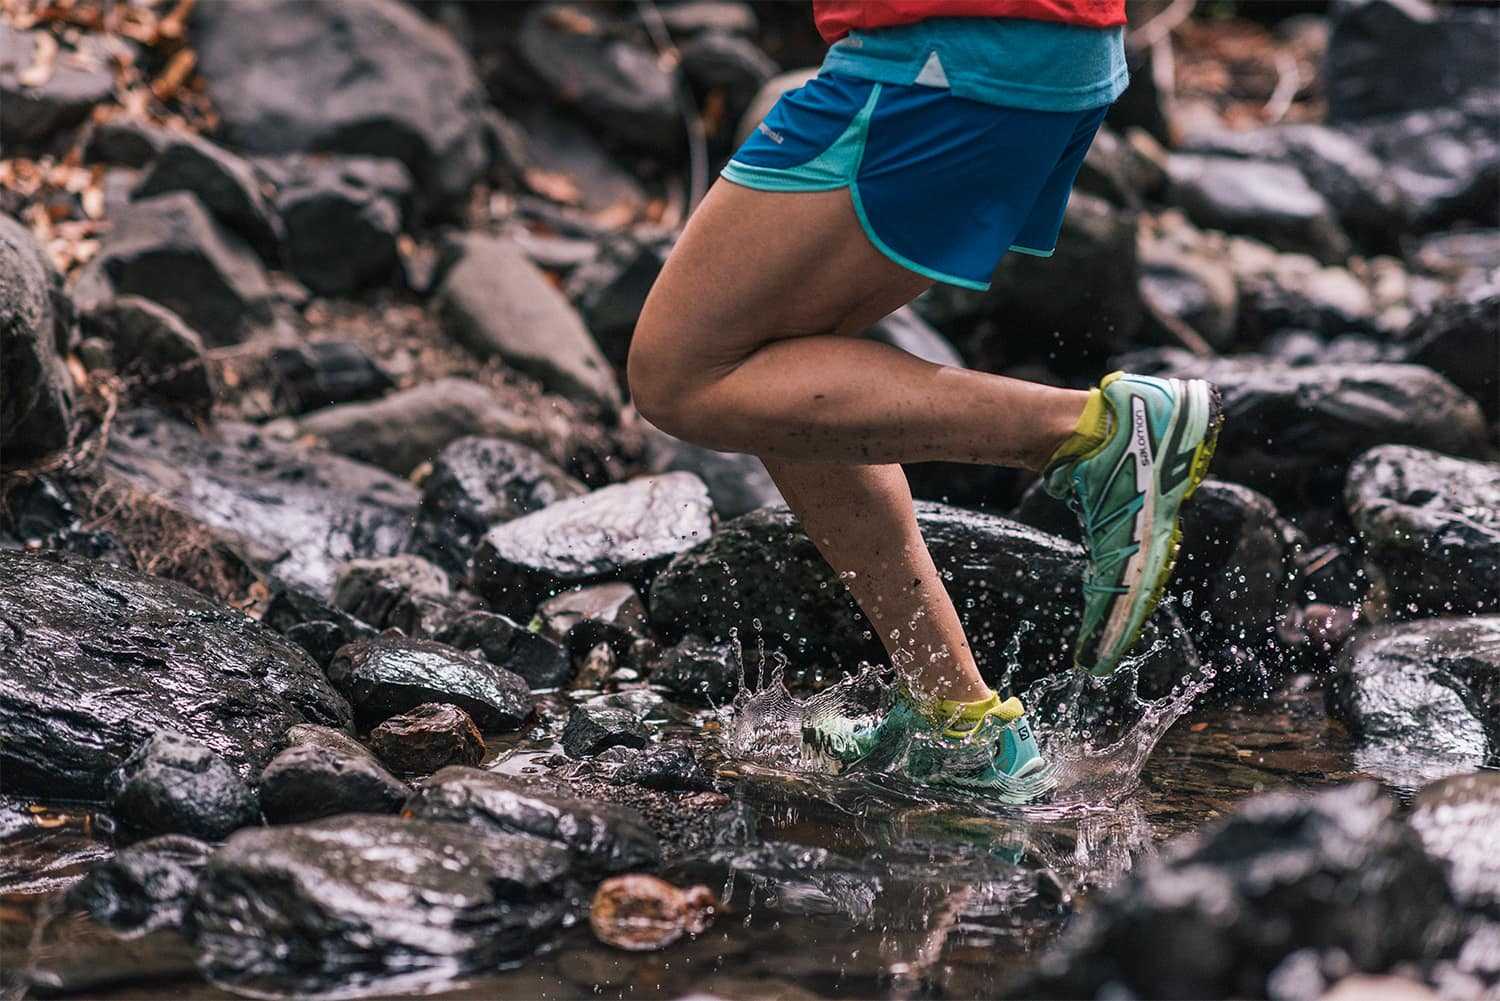 Best Water Shoes For Women